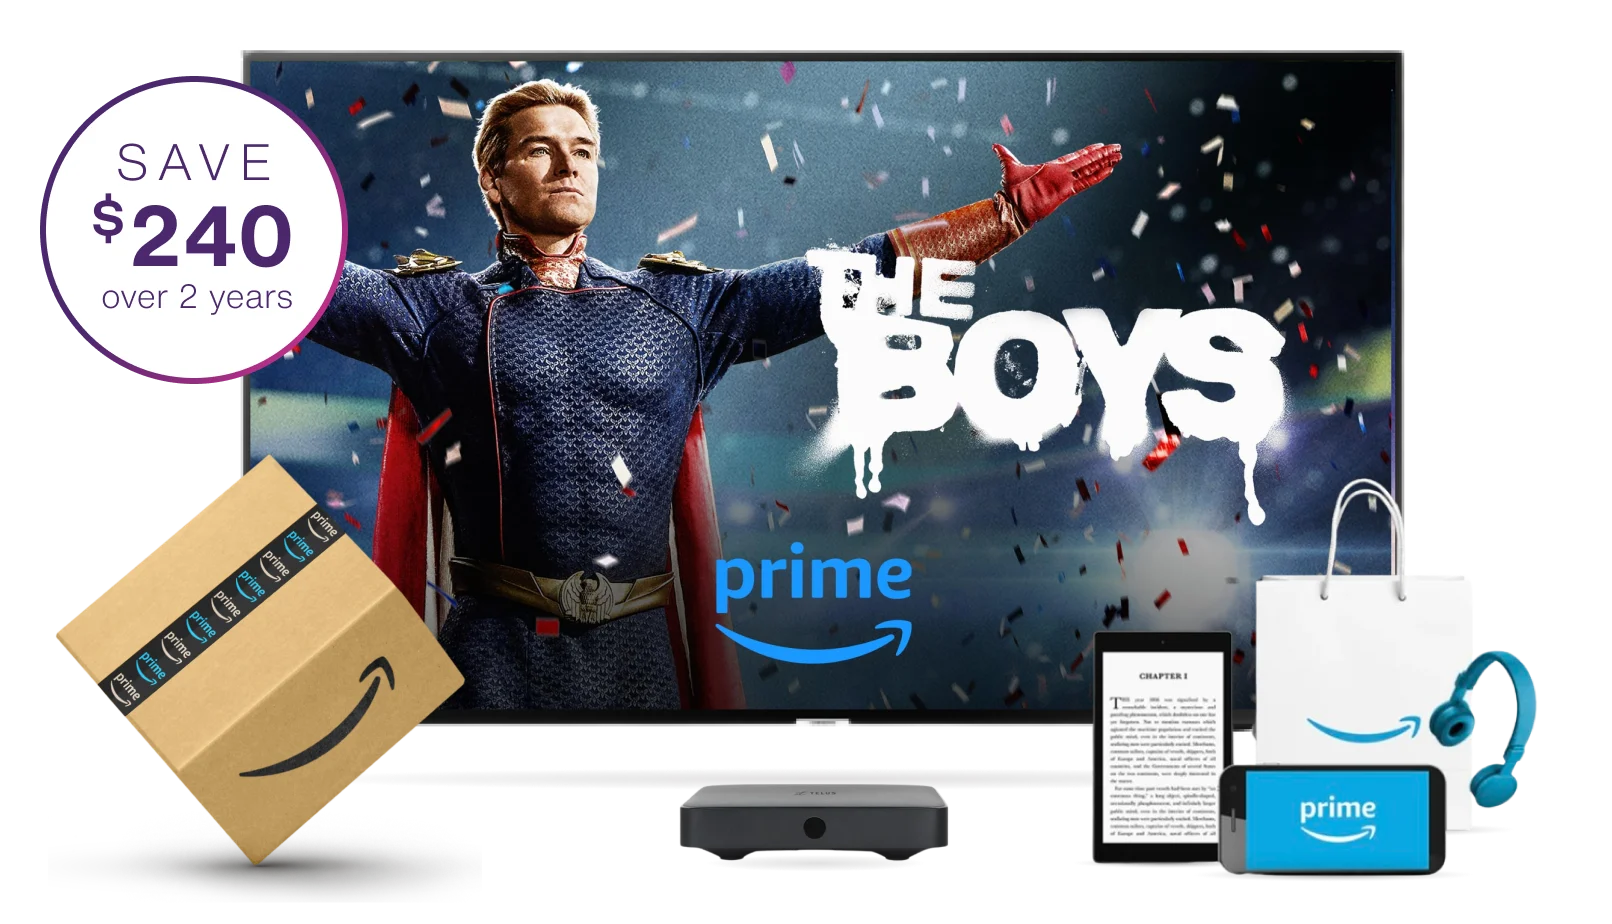 Amazon Prime, image shows amazon parcels, a Kindle e-reader, a smartphone, headphones and a television with a poster for The Boys tv series. Text reads: Save $240 over 2 years.